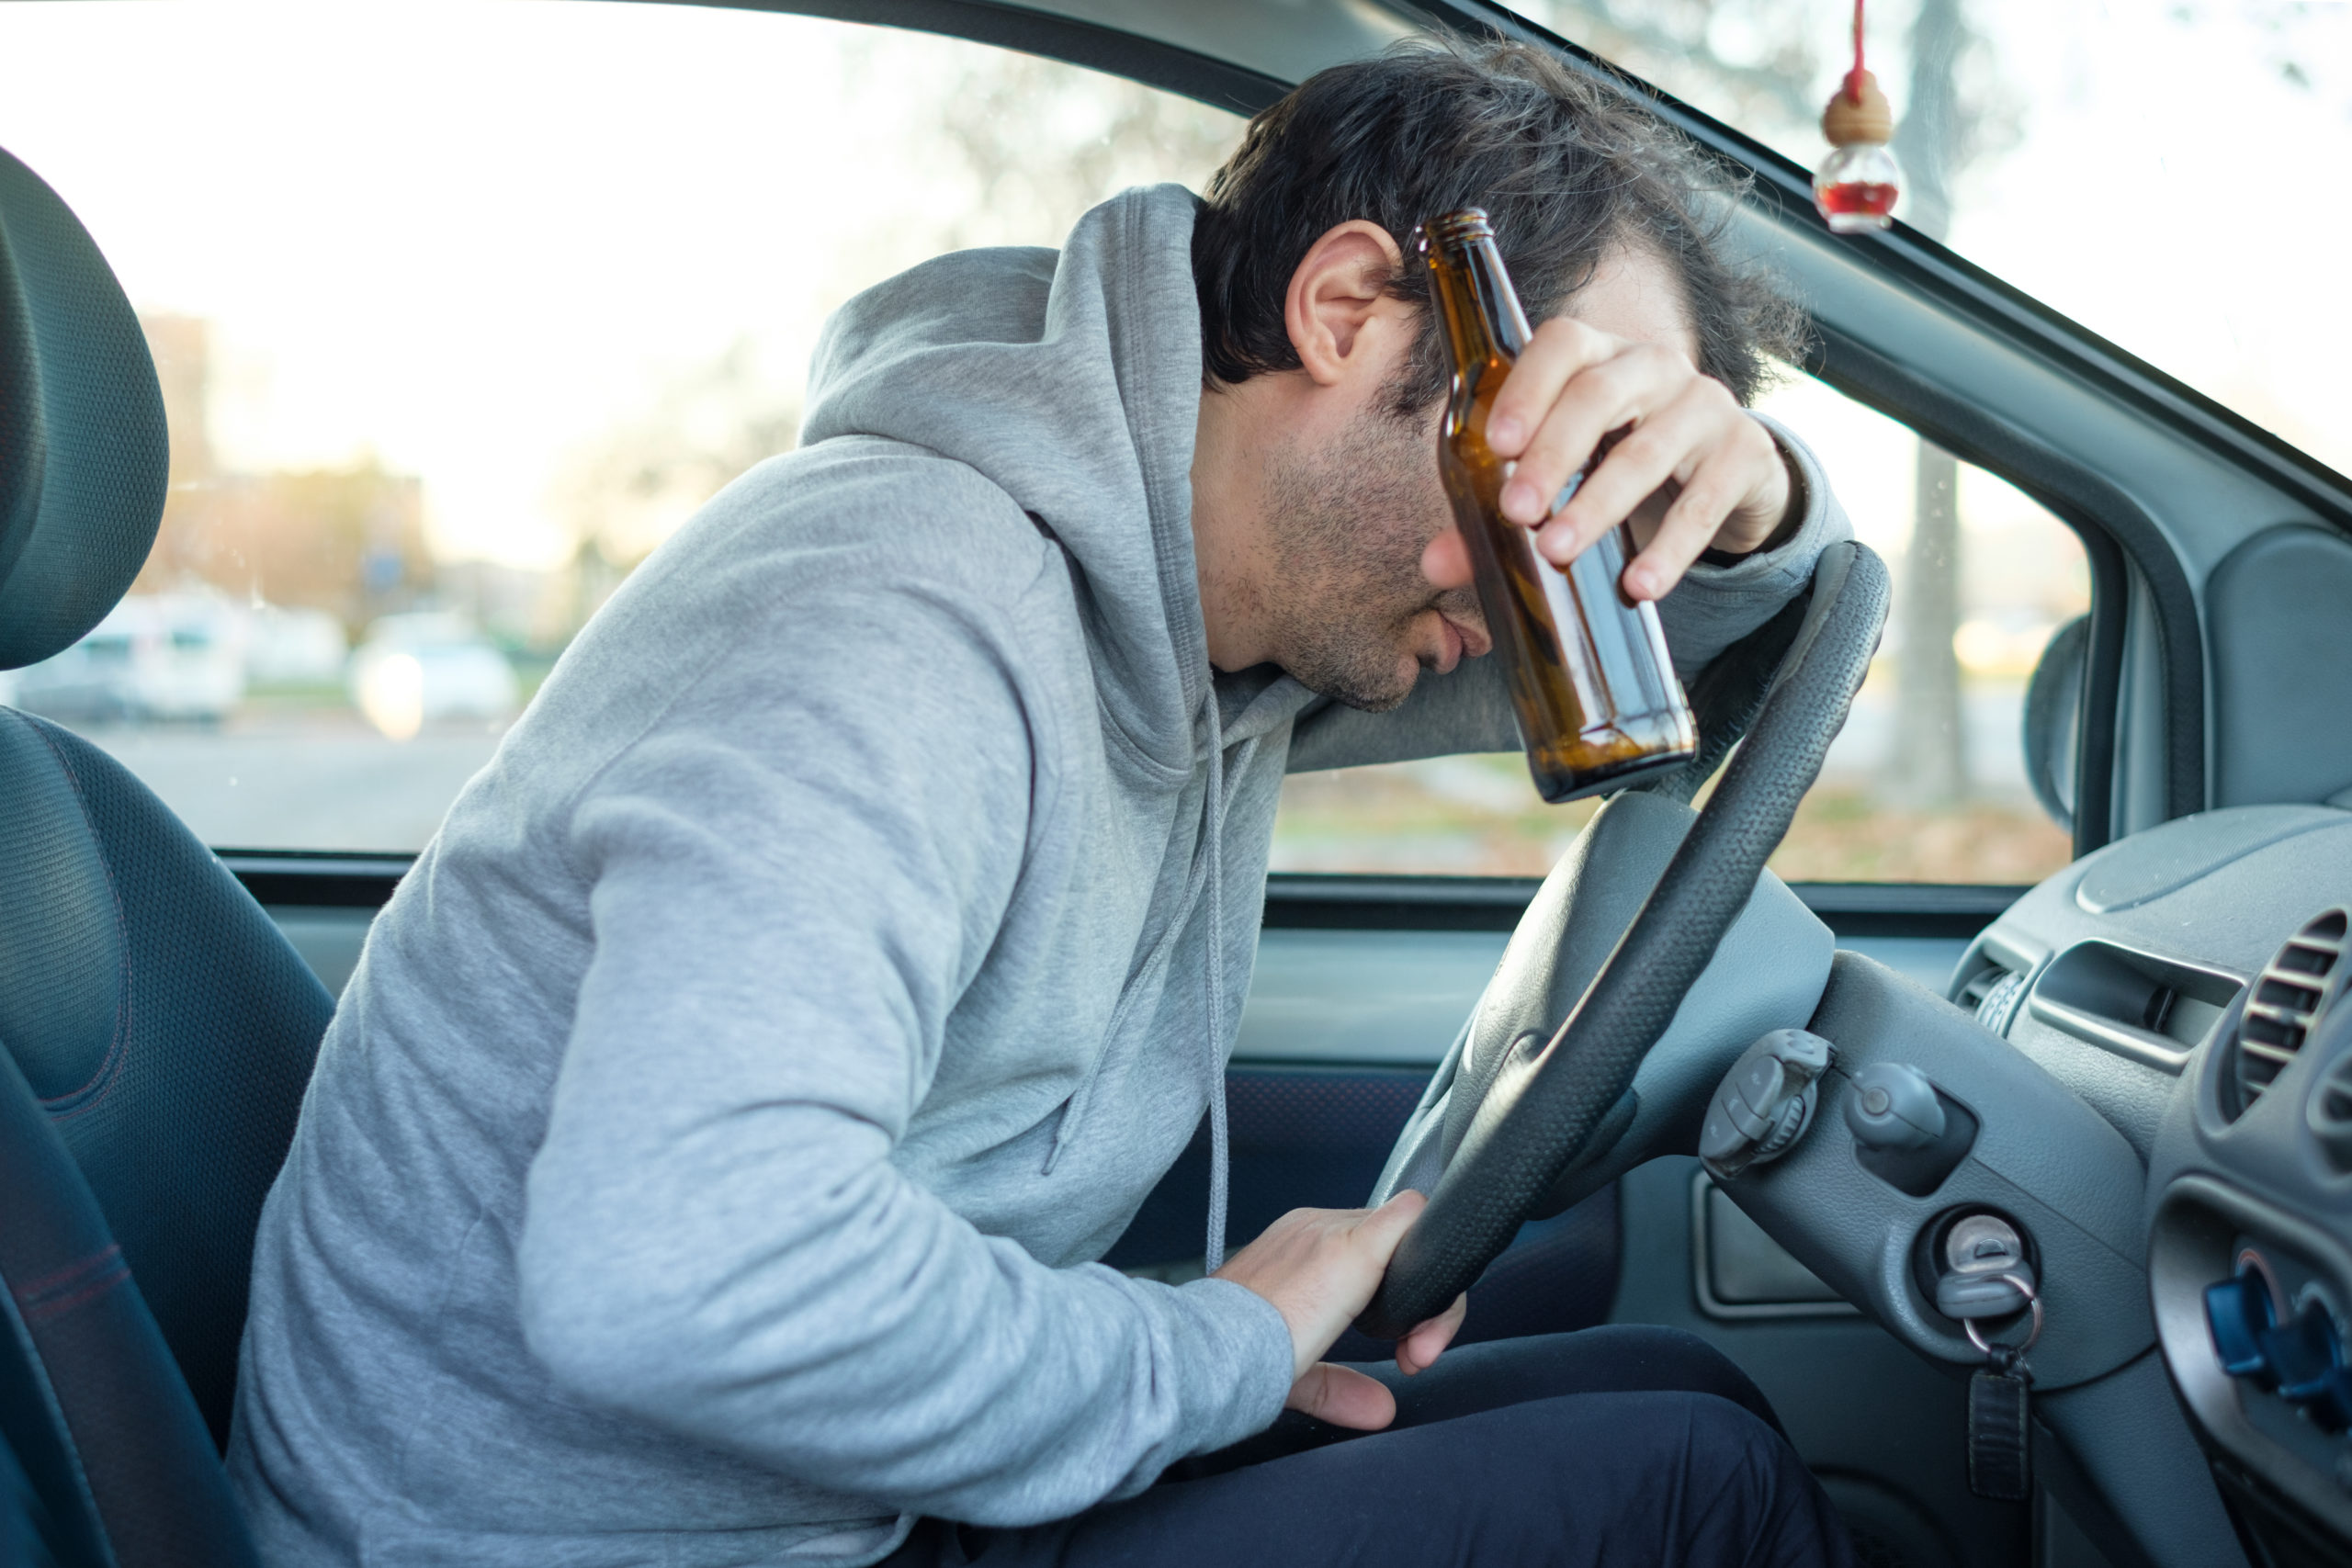 How Falling Asleep Could Lead To DUI Charges